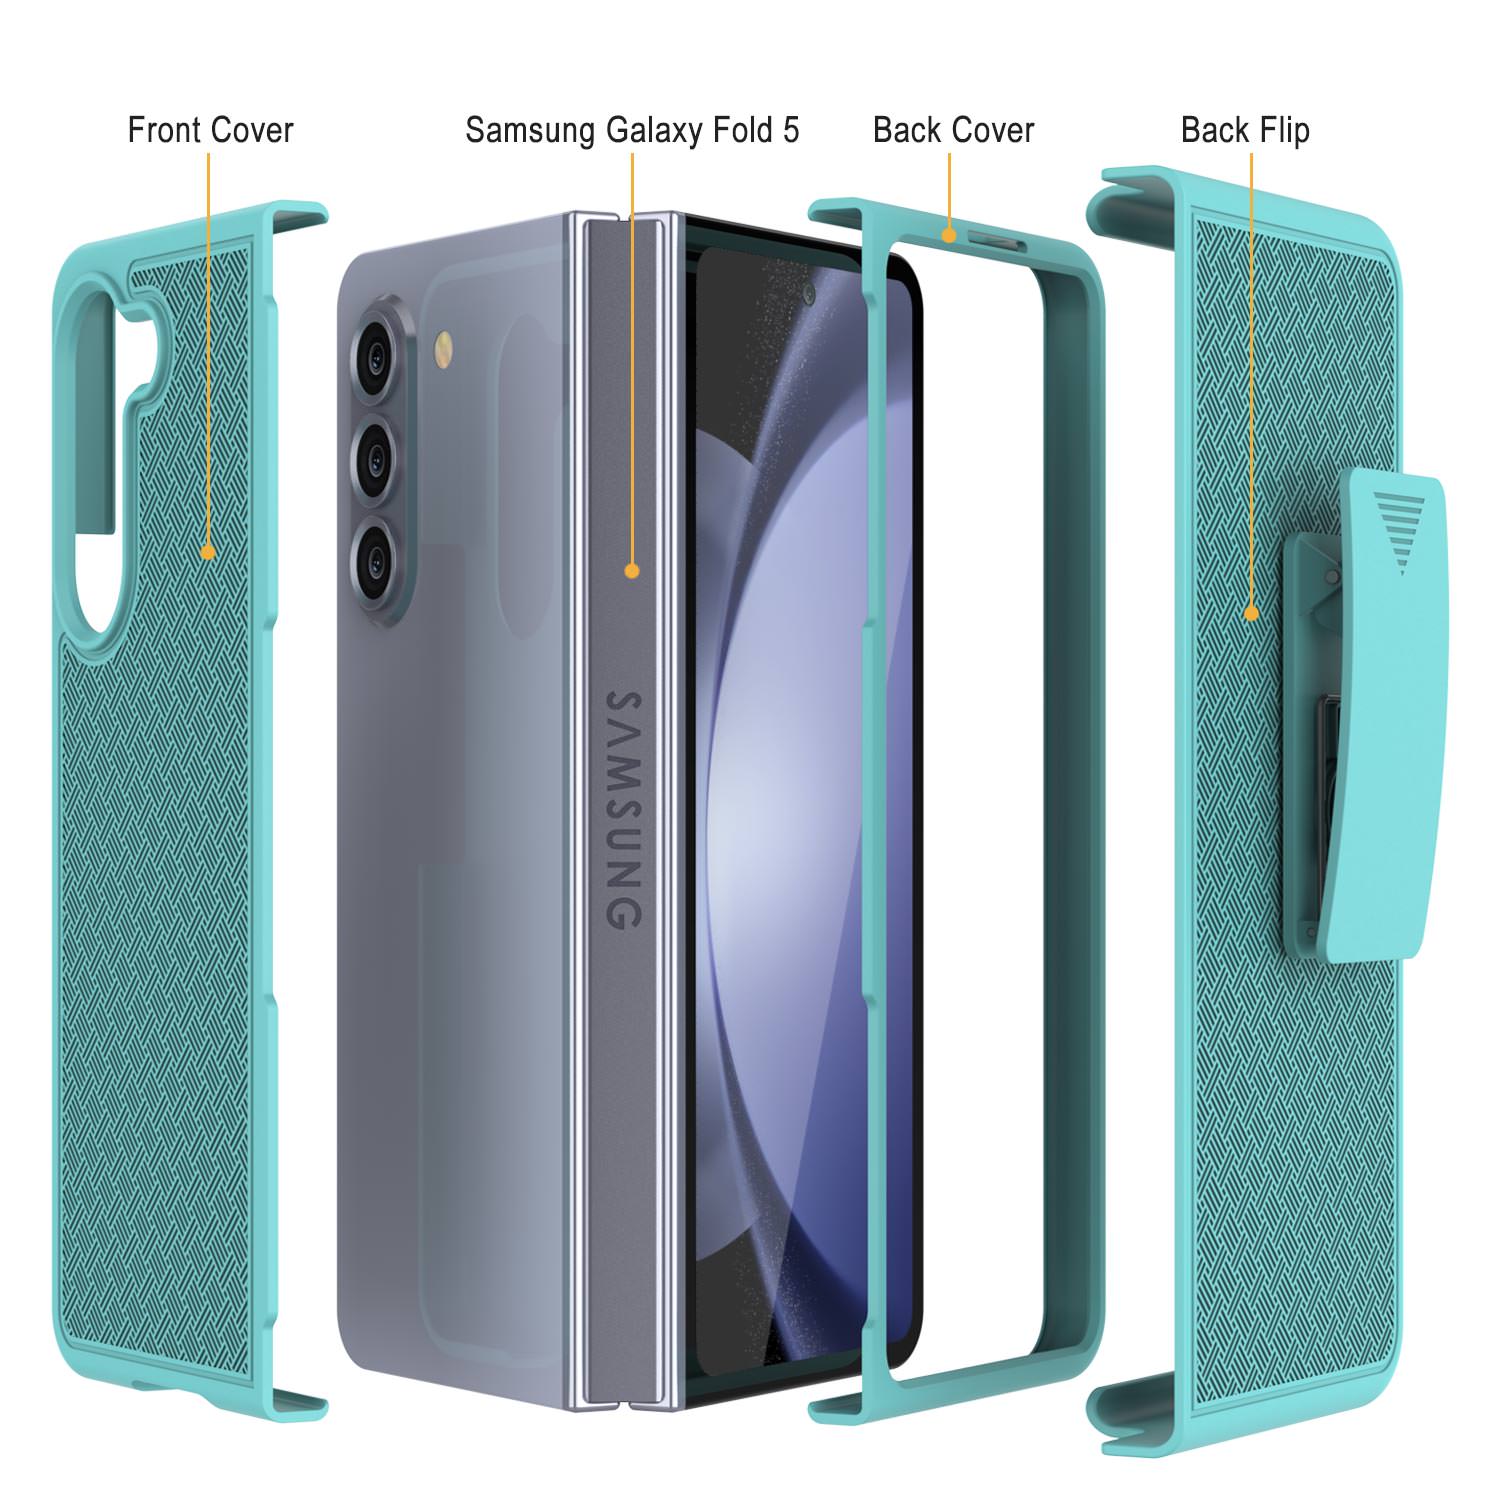 Galaxy Z Fold5 Case With Tempered Glass Screen Protector, Holster Belt Clip & Built-In Kickstand [Teal]